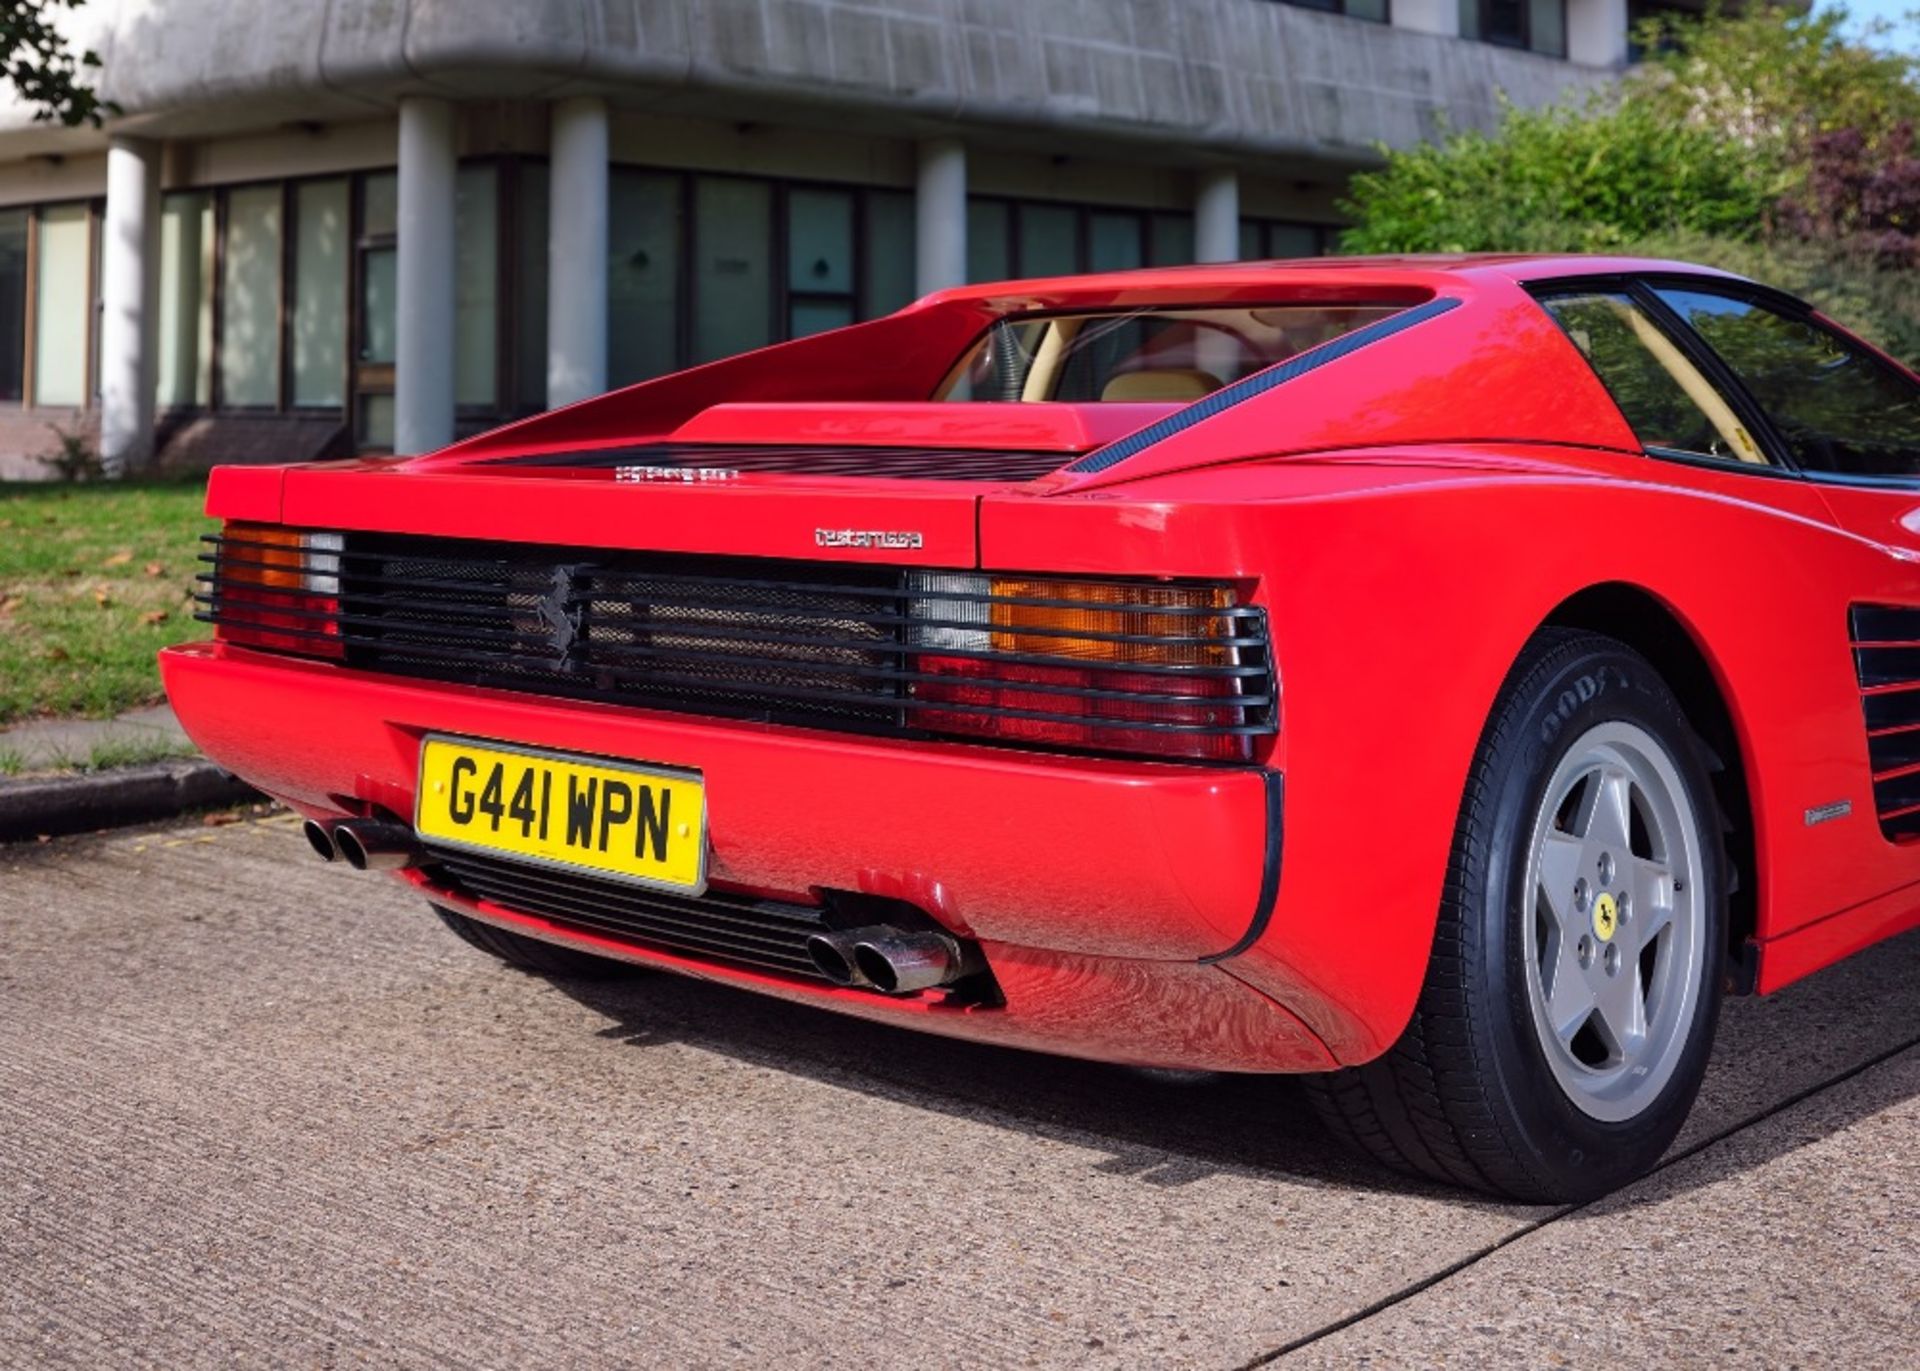 1989 FERRARI TESTAROSSA Registration Number: G441 WPN Chassis Number: ZFFAA17C000082817 Recorded - Image 8 of 59